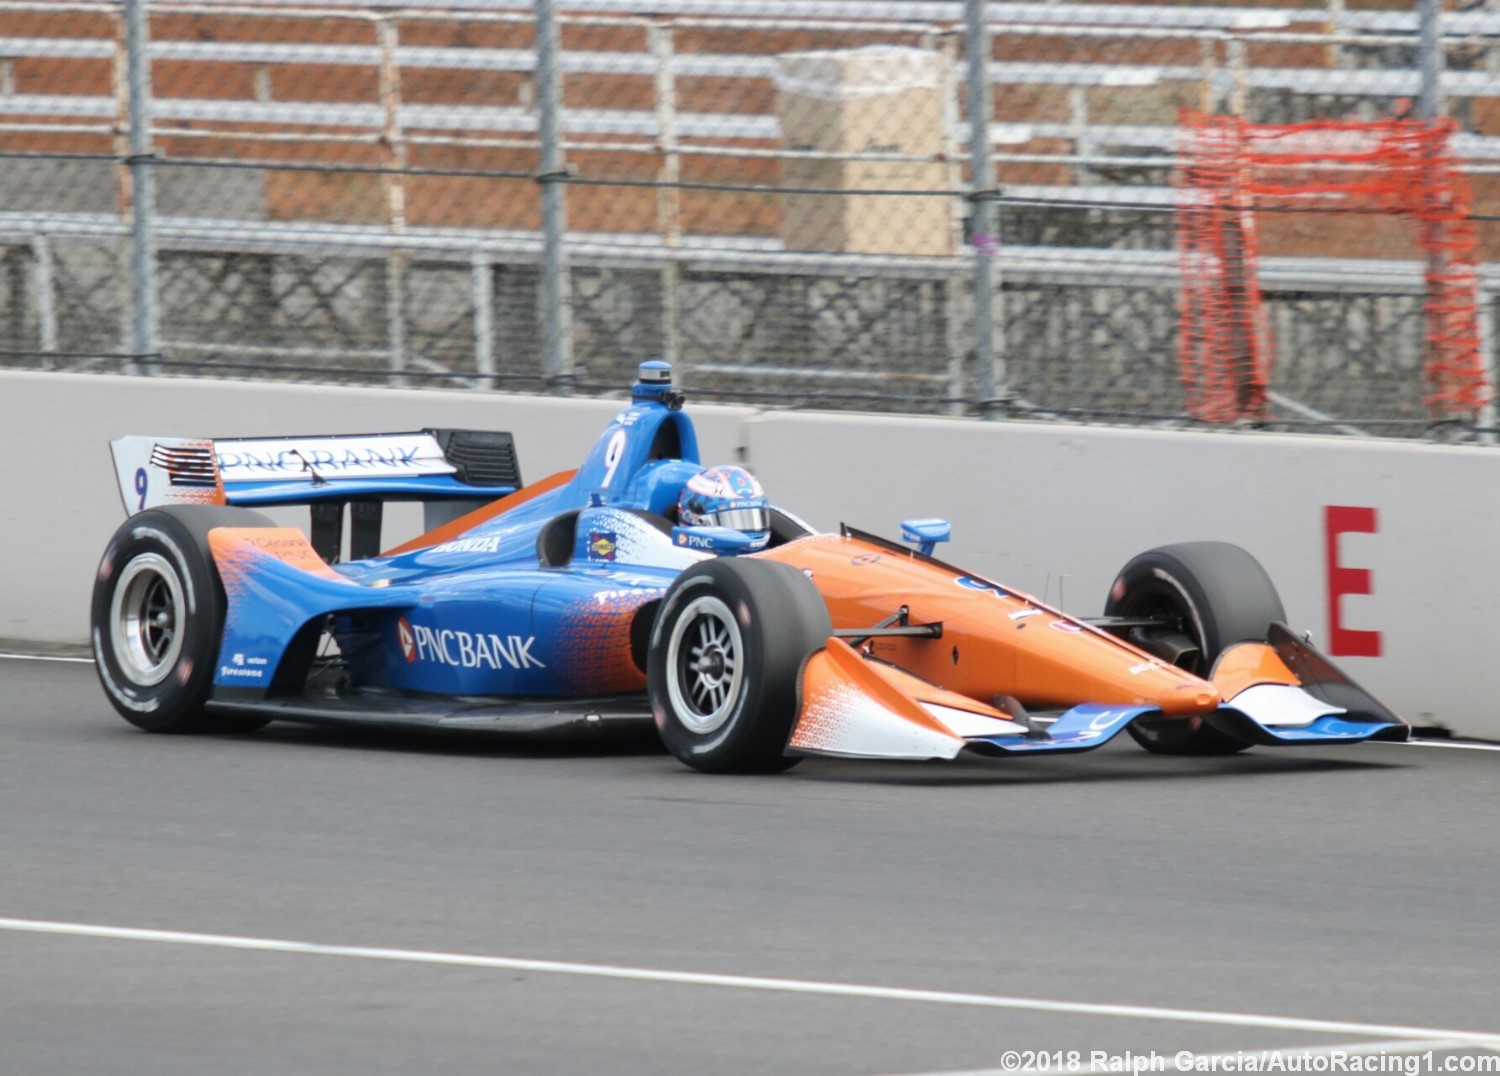 Scott Dixon could only manage 8th